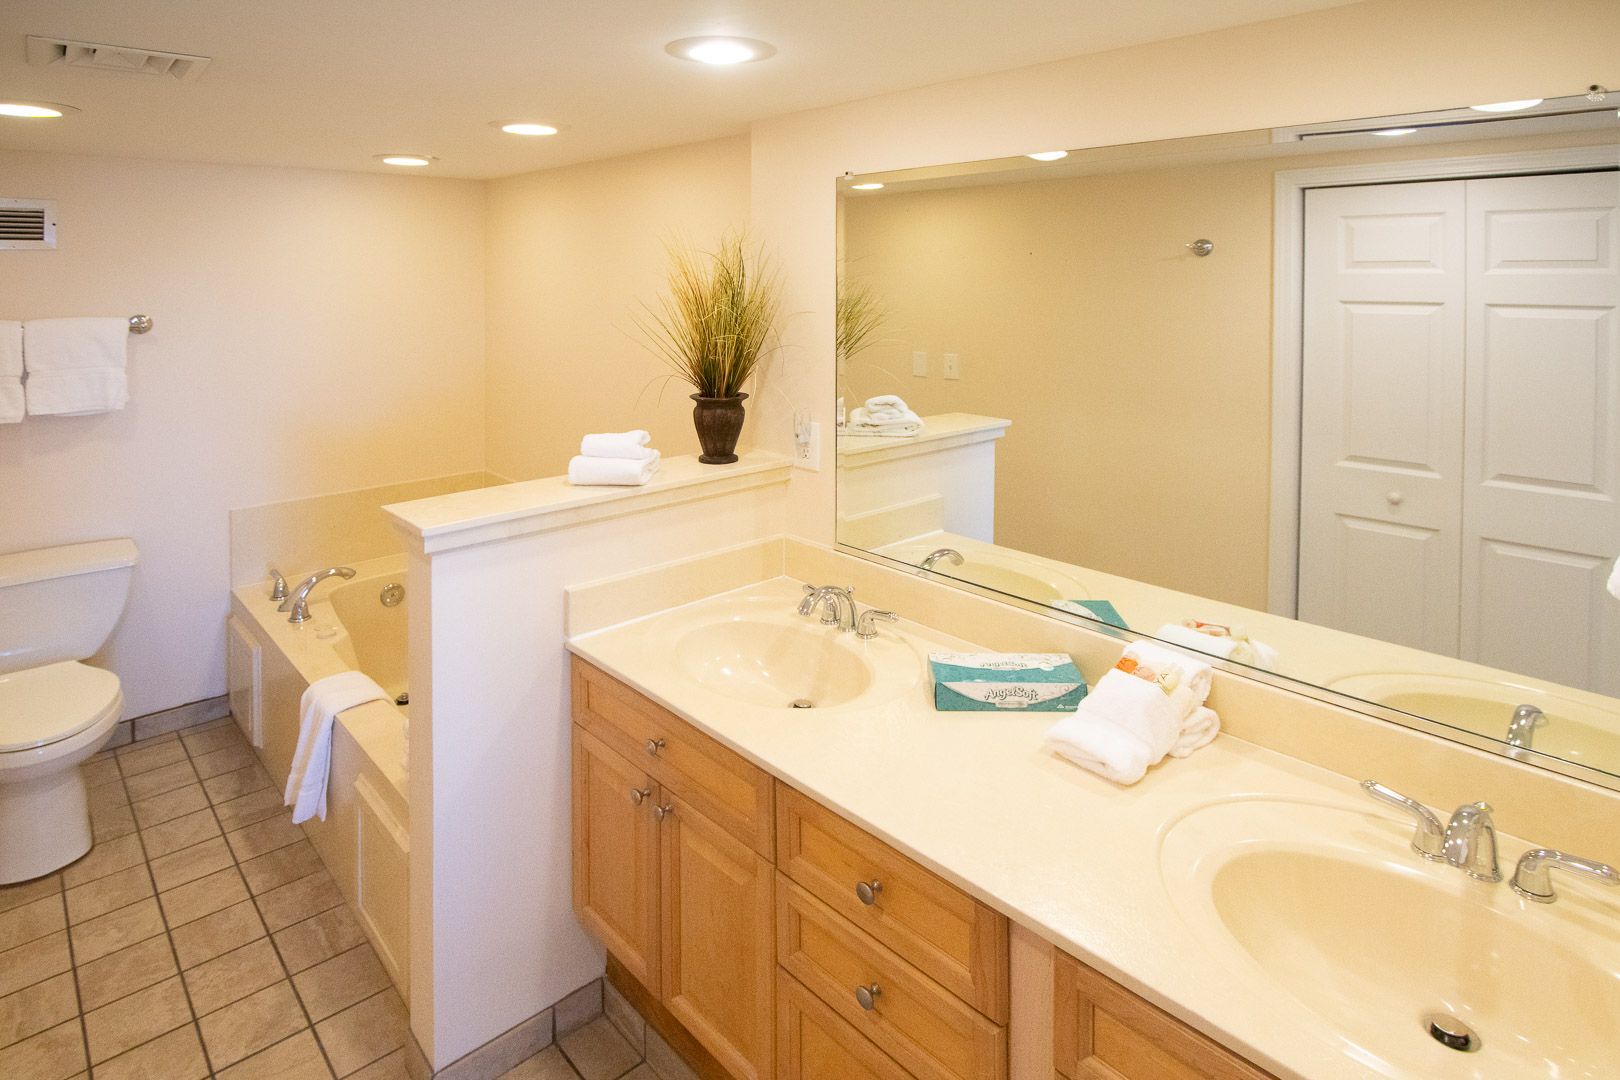 An expansive bathroom with a Hot tub at VRI's Bay Club of Sandestin in Florida.